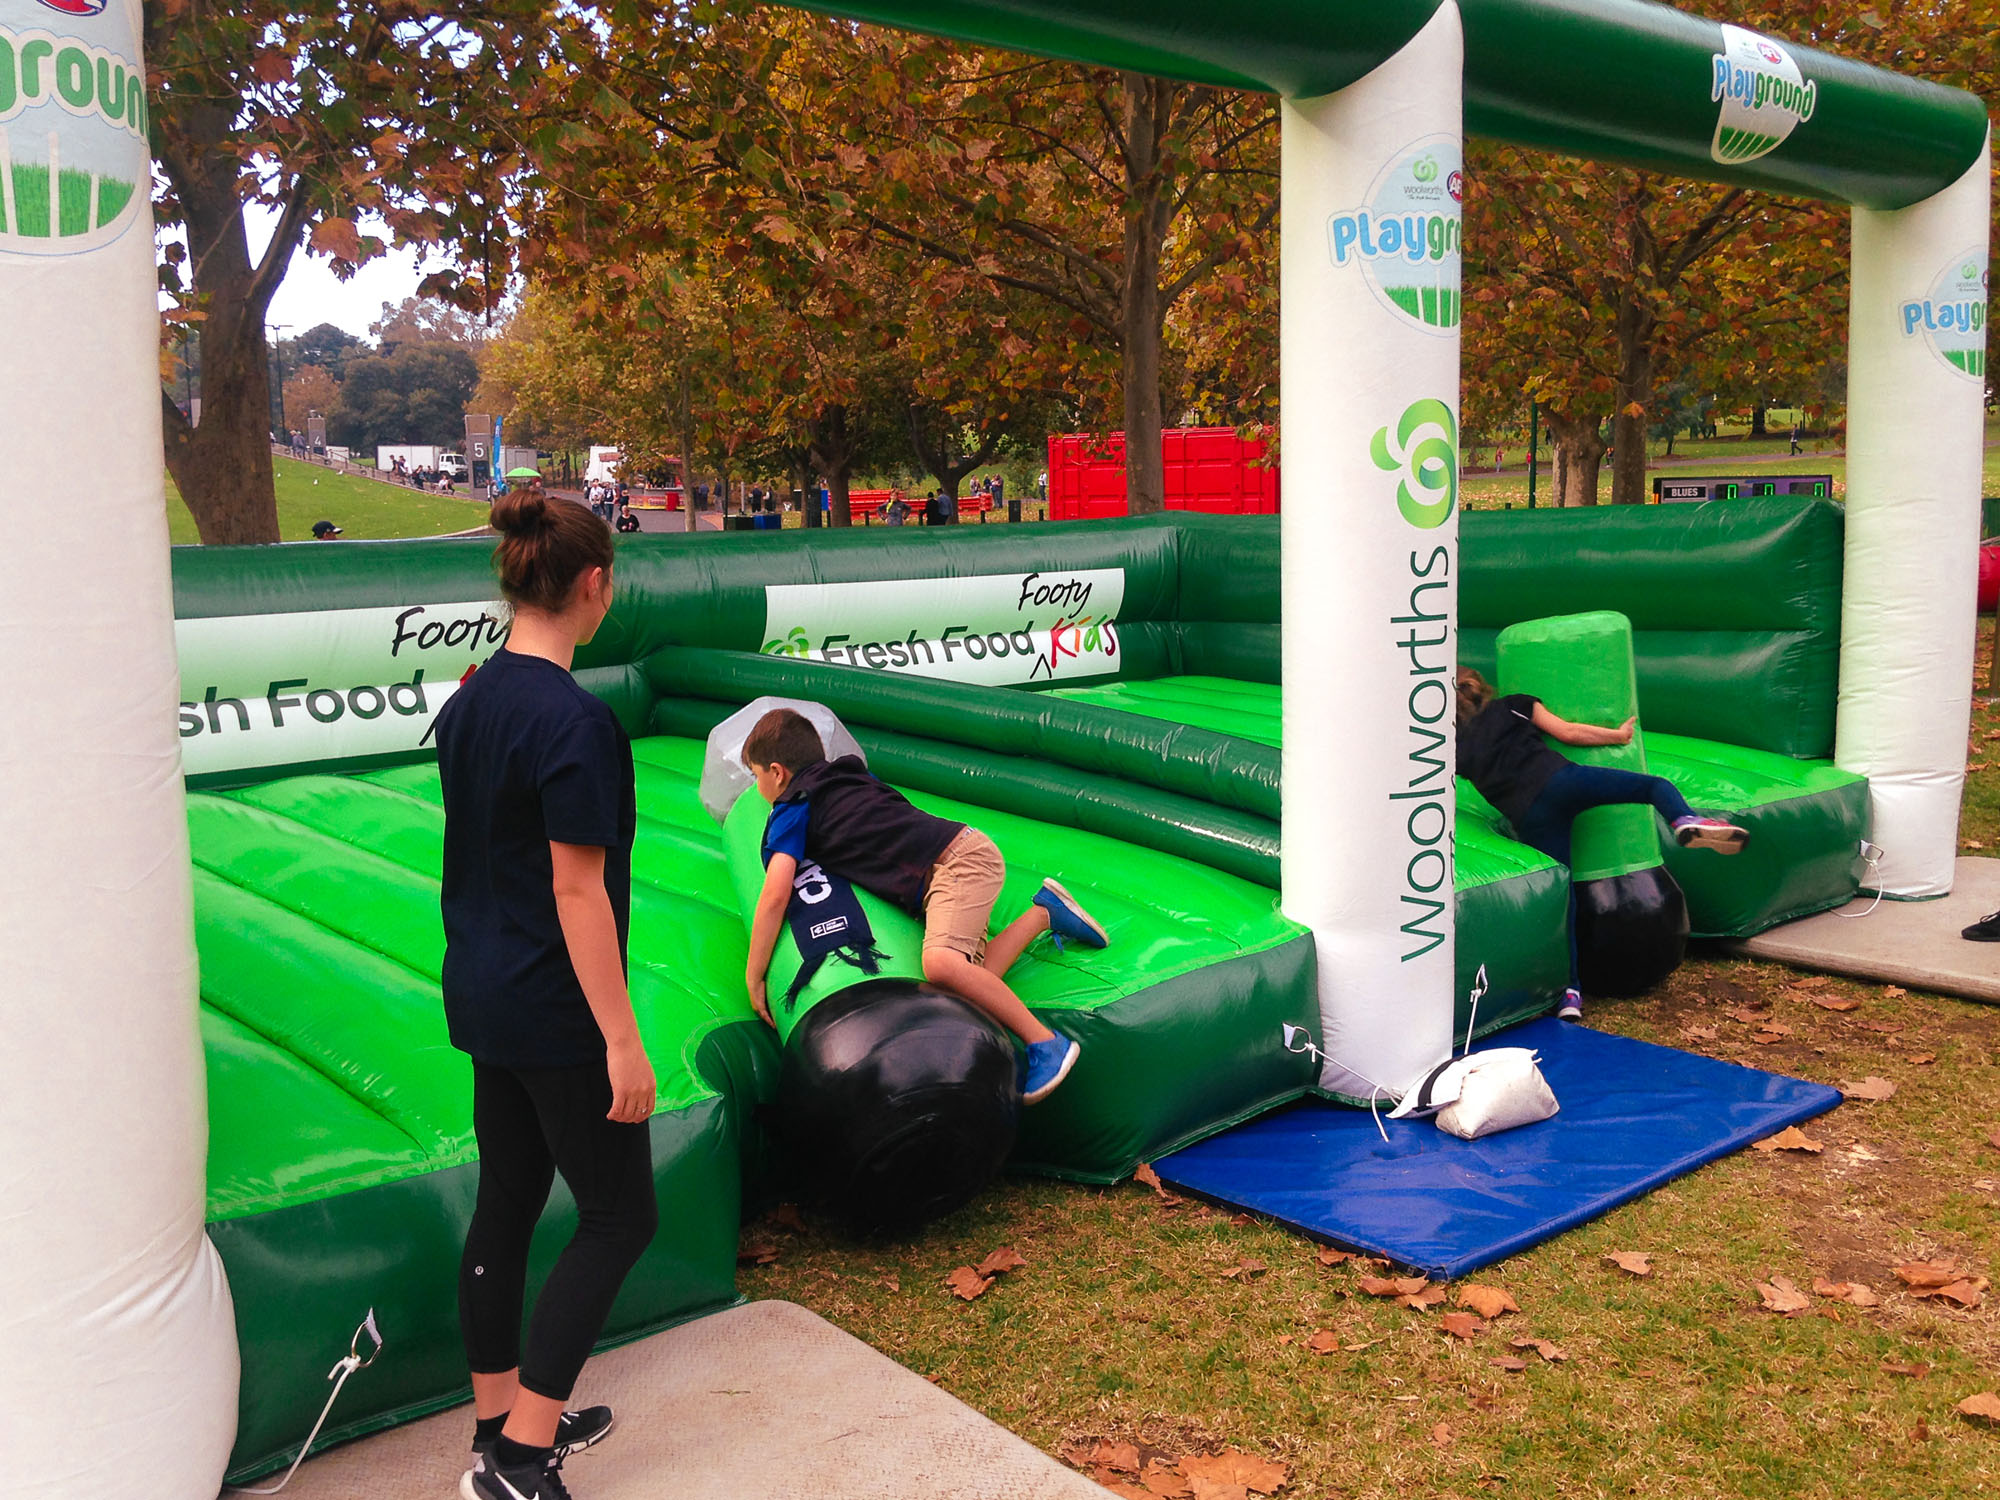 Inflatable rugby tackle lanes provide a safe environment for young athletes to exert all their tackling energy in an entirely safe environment.